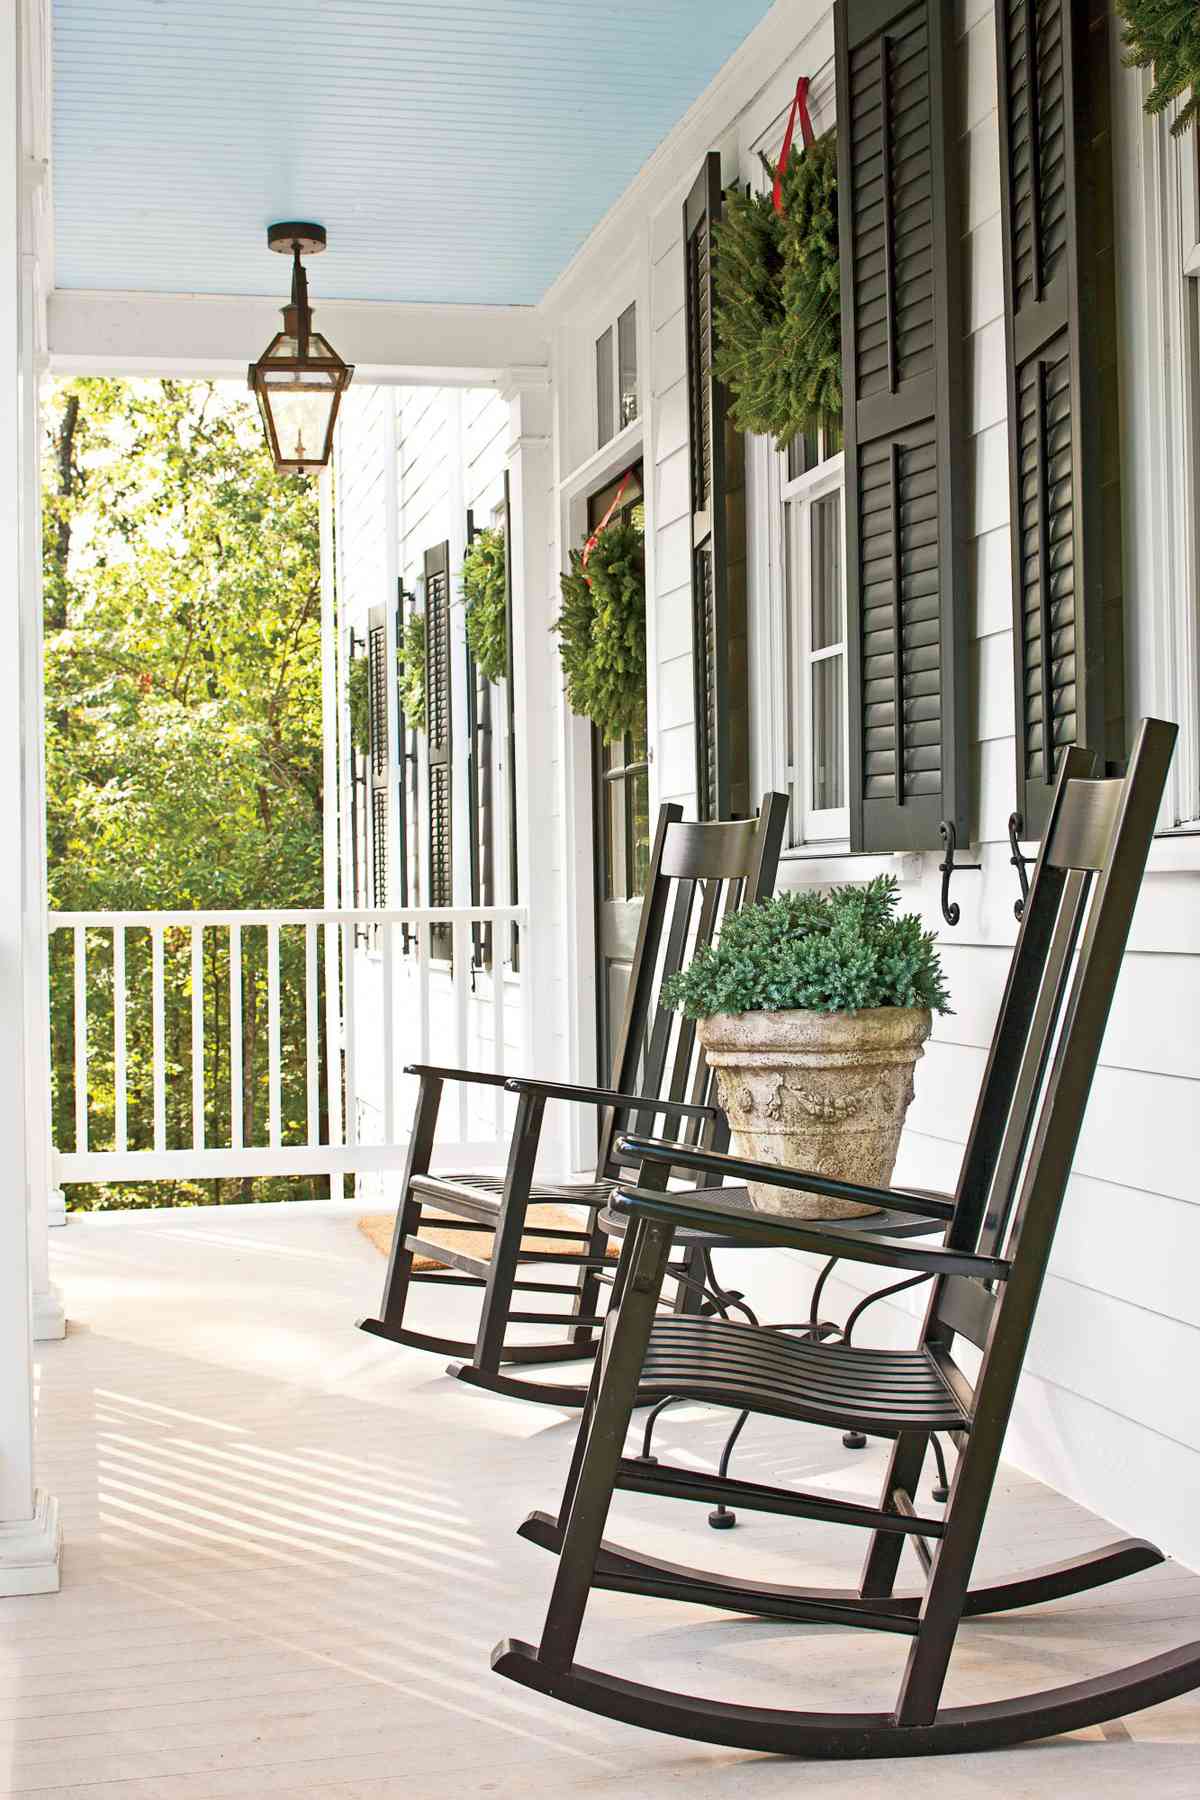 Get the Look: The Farmhouse Porch